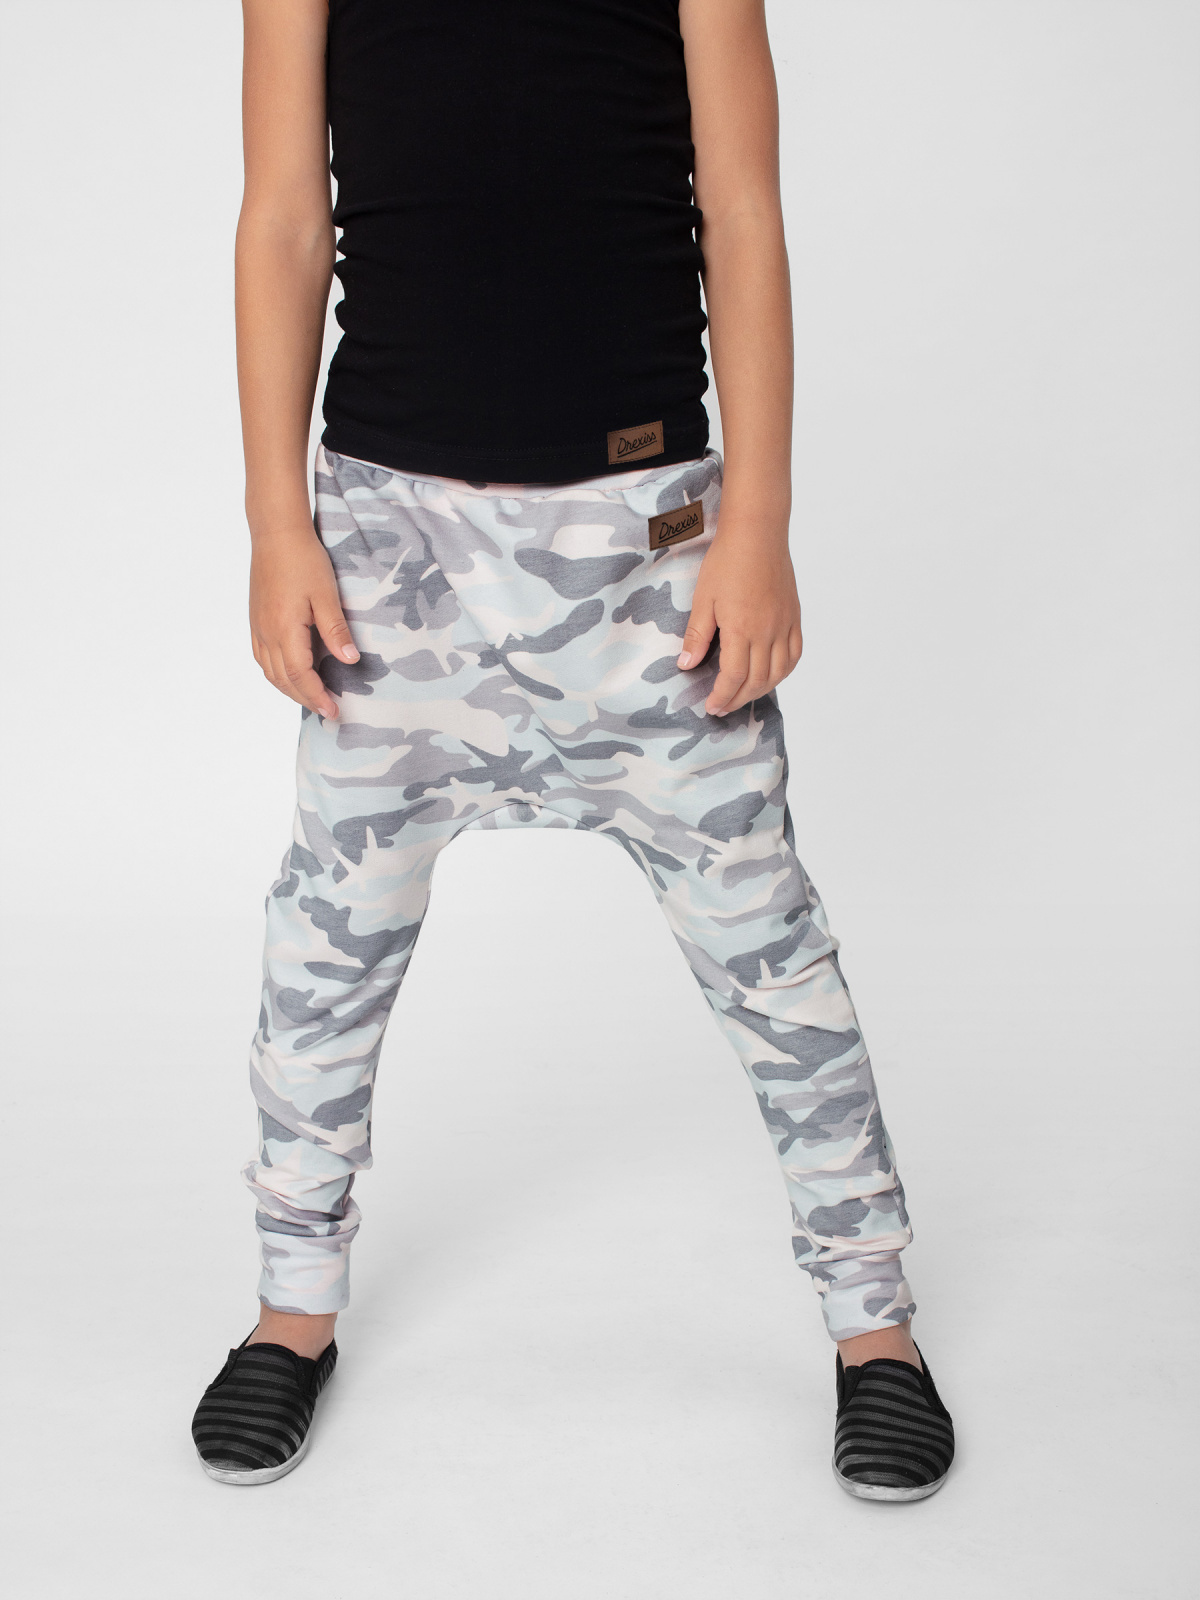 Drexiss baggy ARMY GREY Velikost: vel. 104